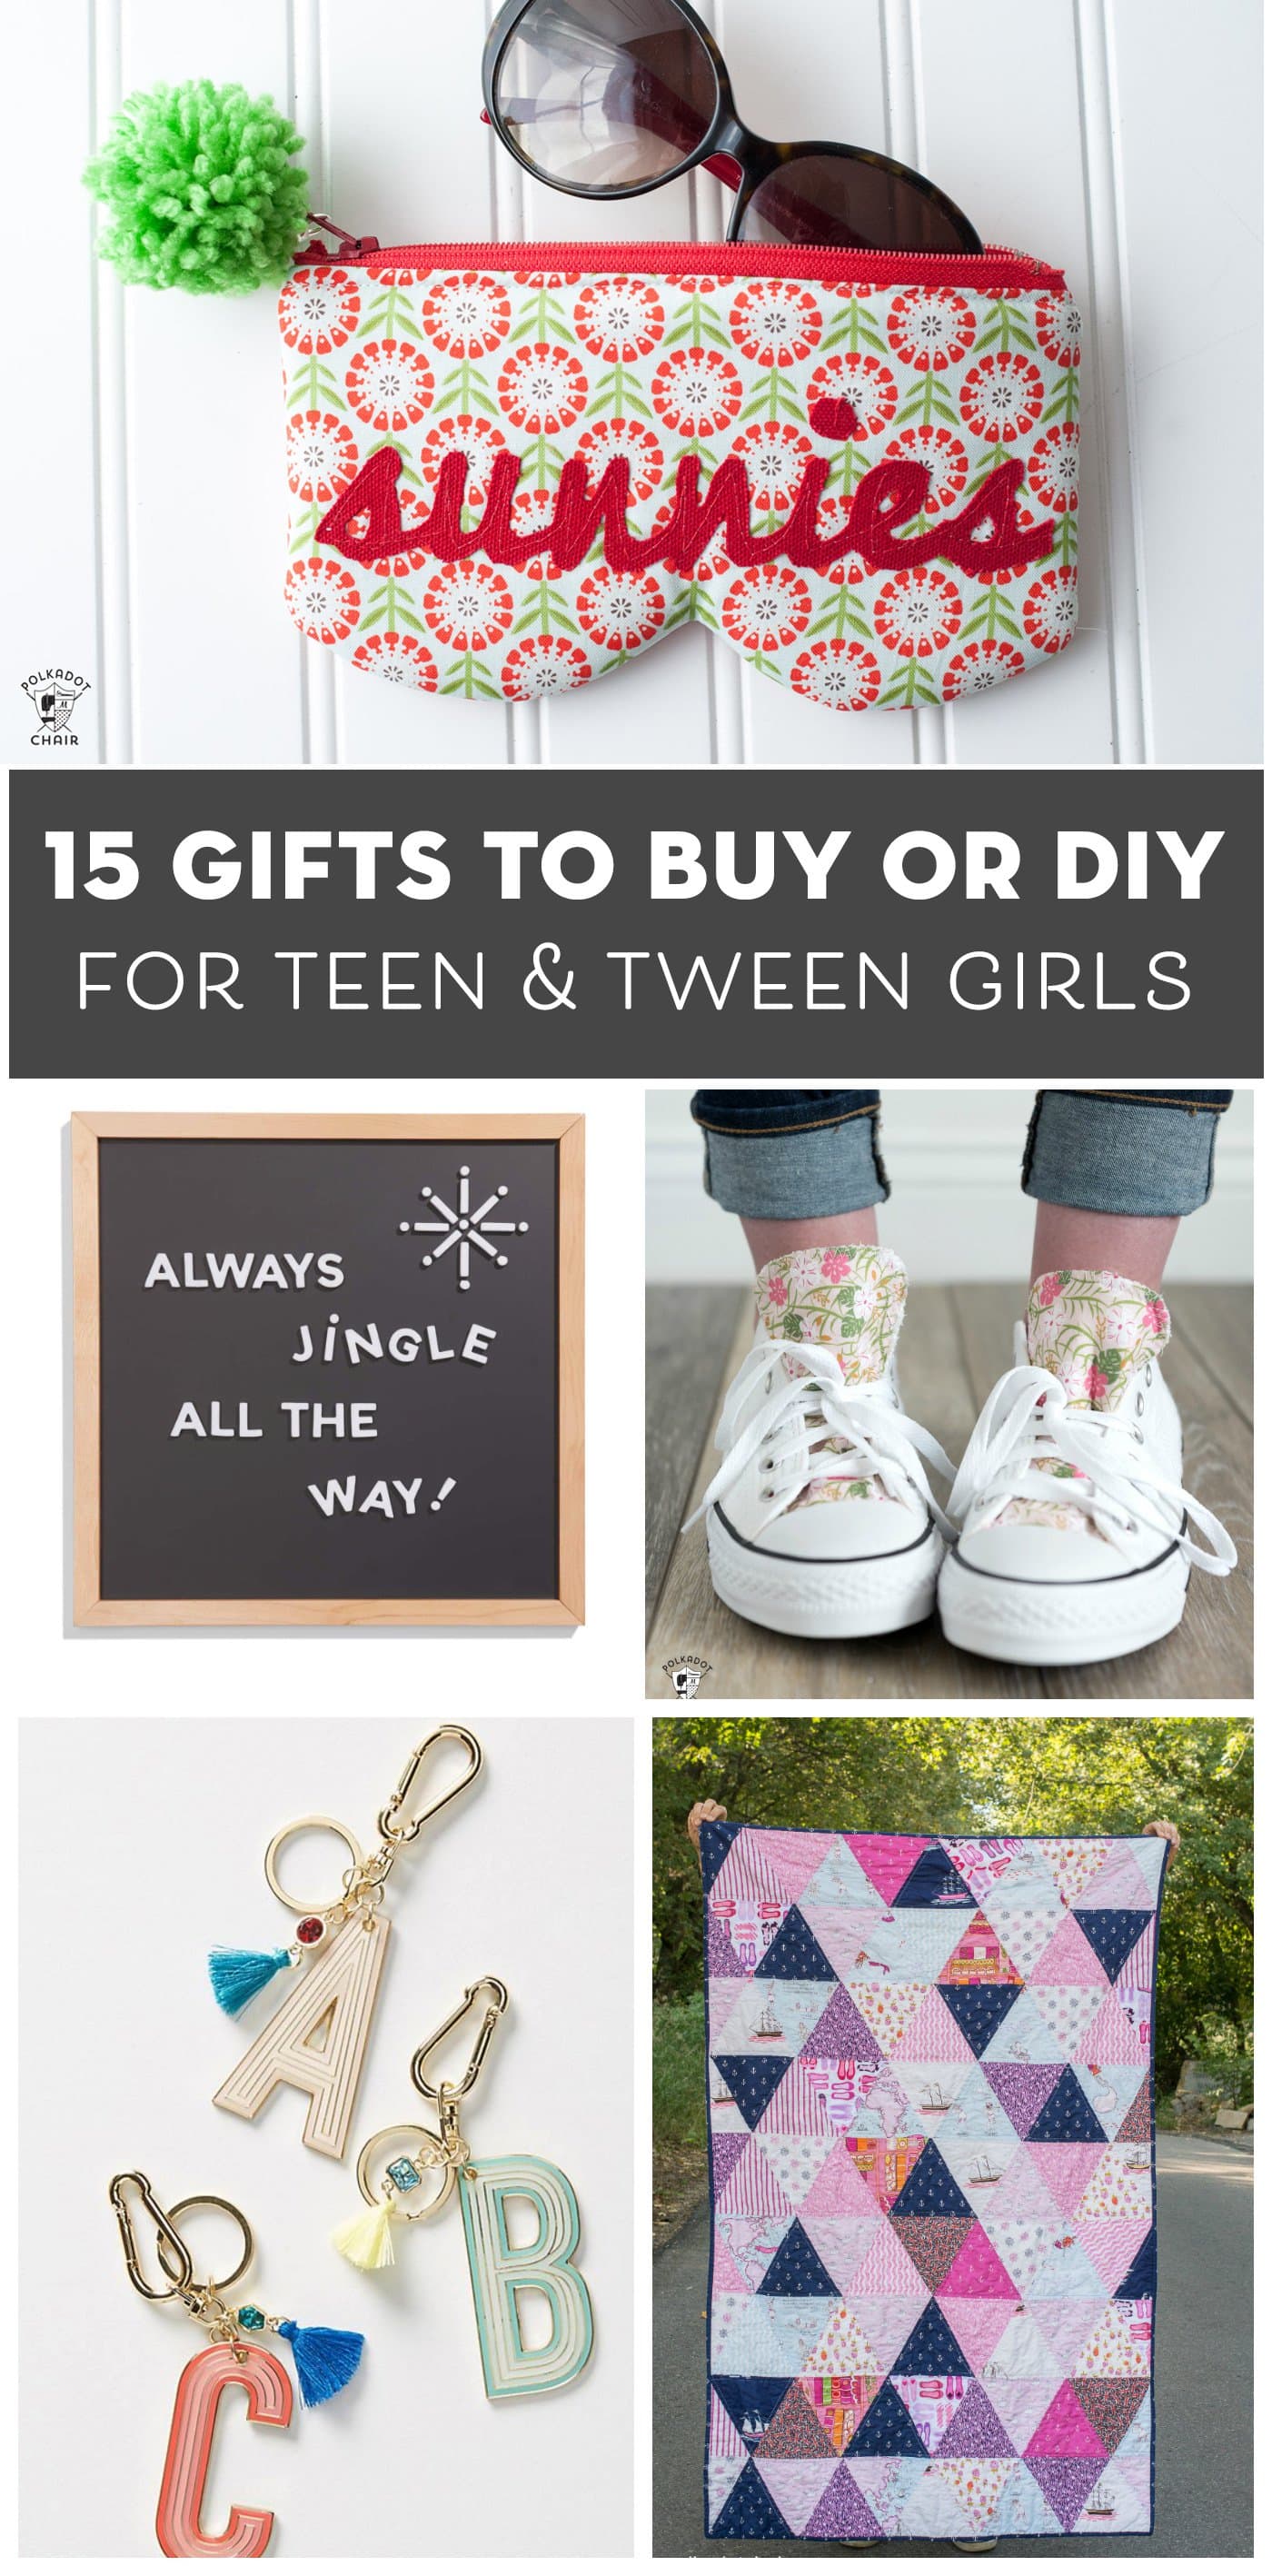 15 Gift Ideas for Teenage Girls That You Can DIY or Buy Polka Dot Chair